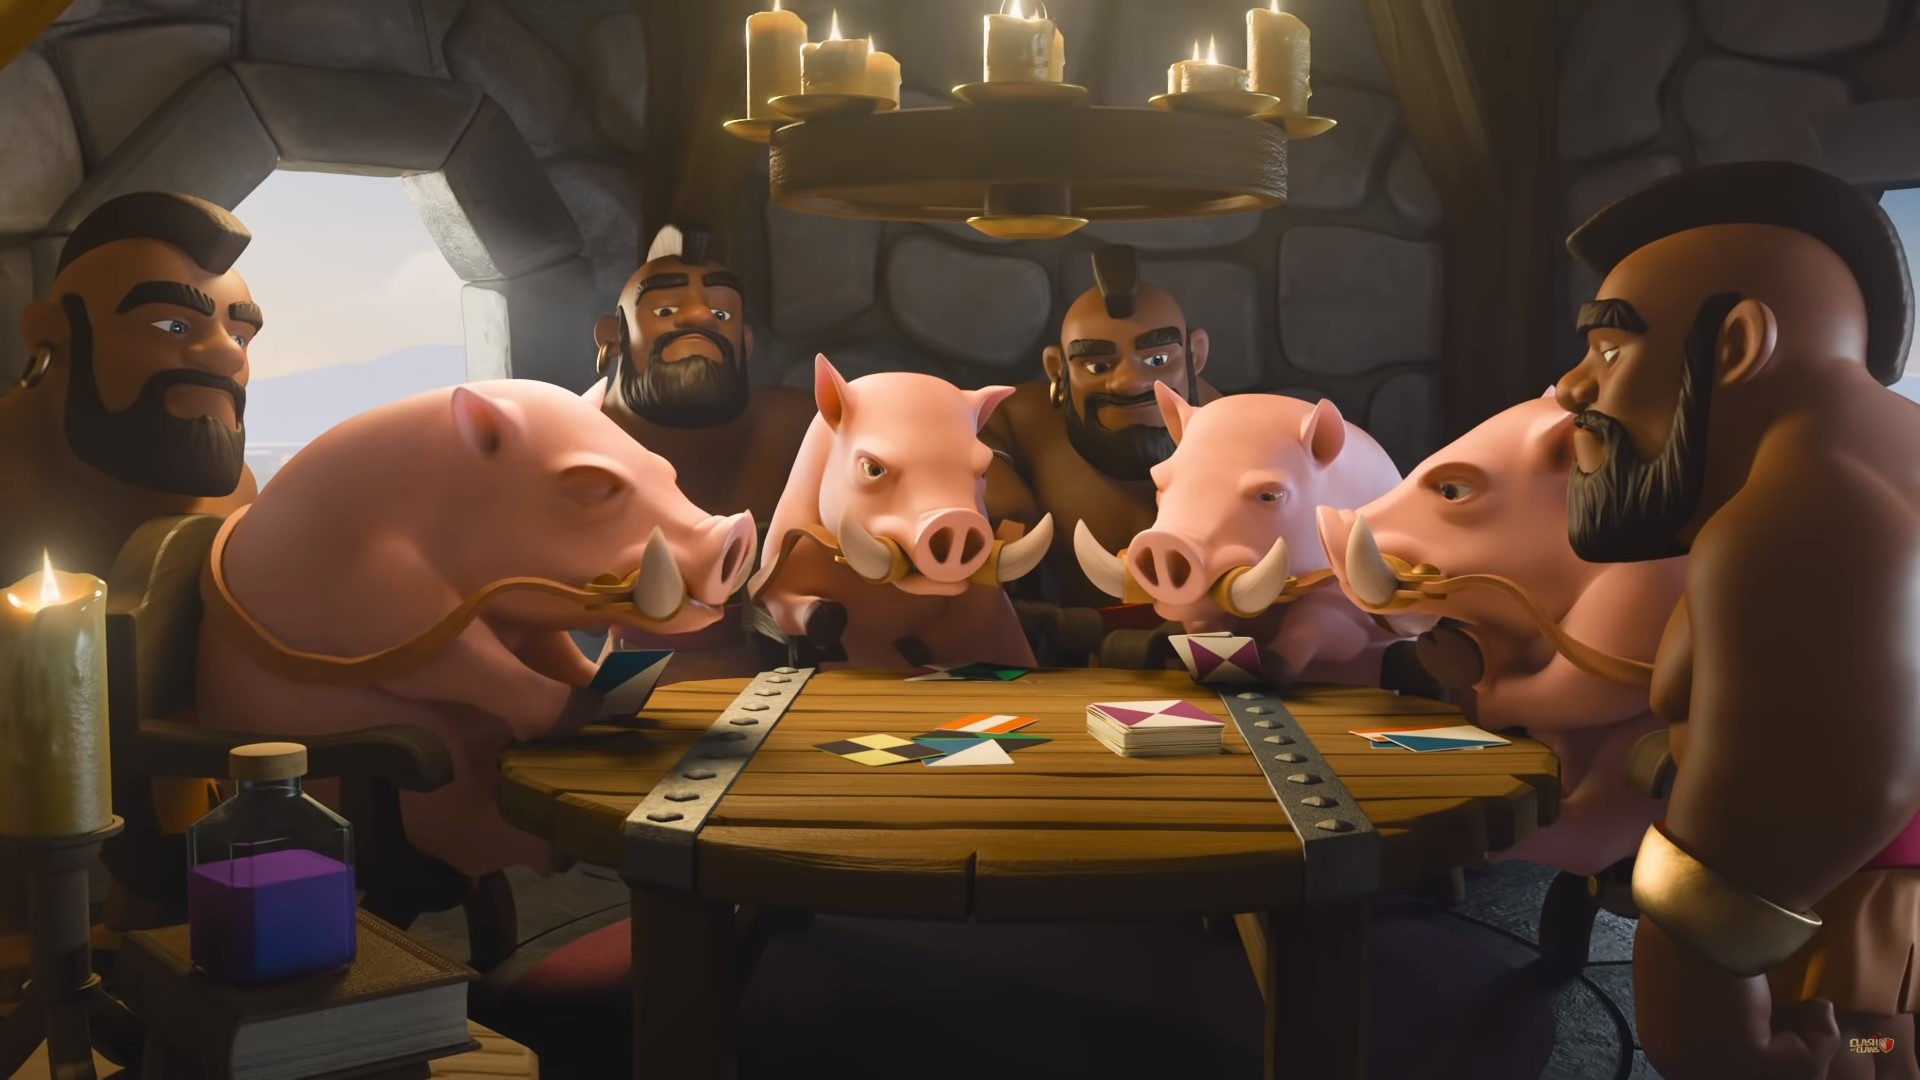 Best mobile strategy games: Clash of Clans. Image shows a bunch of people and pigs sitting around a table.